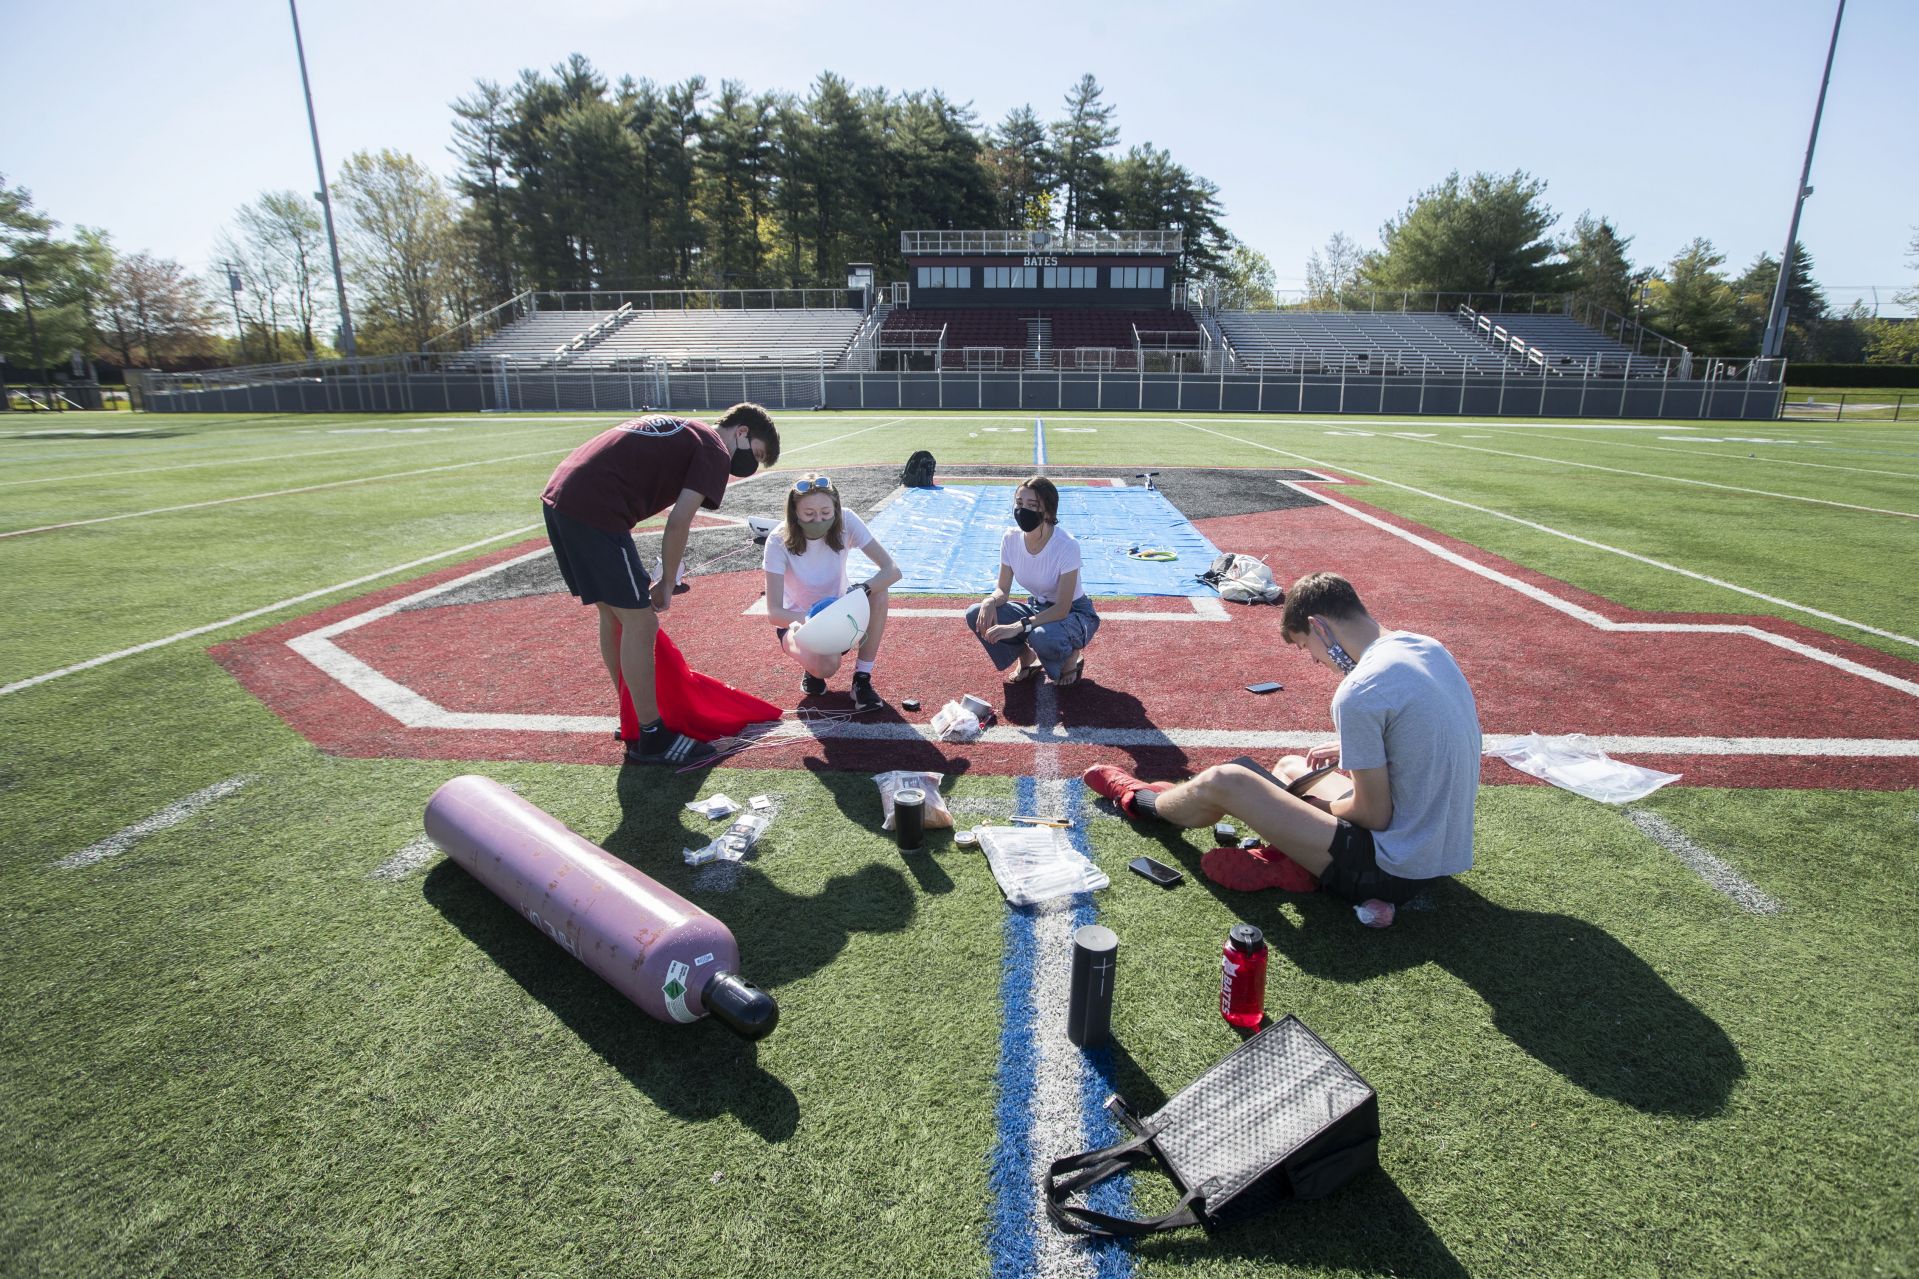 Members of the High Altitude Ballooning Club lay out their gear on May 15 in preparation for a launch from Garcelon Field. (Phyllis Graber Jensen/Bates College)